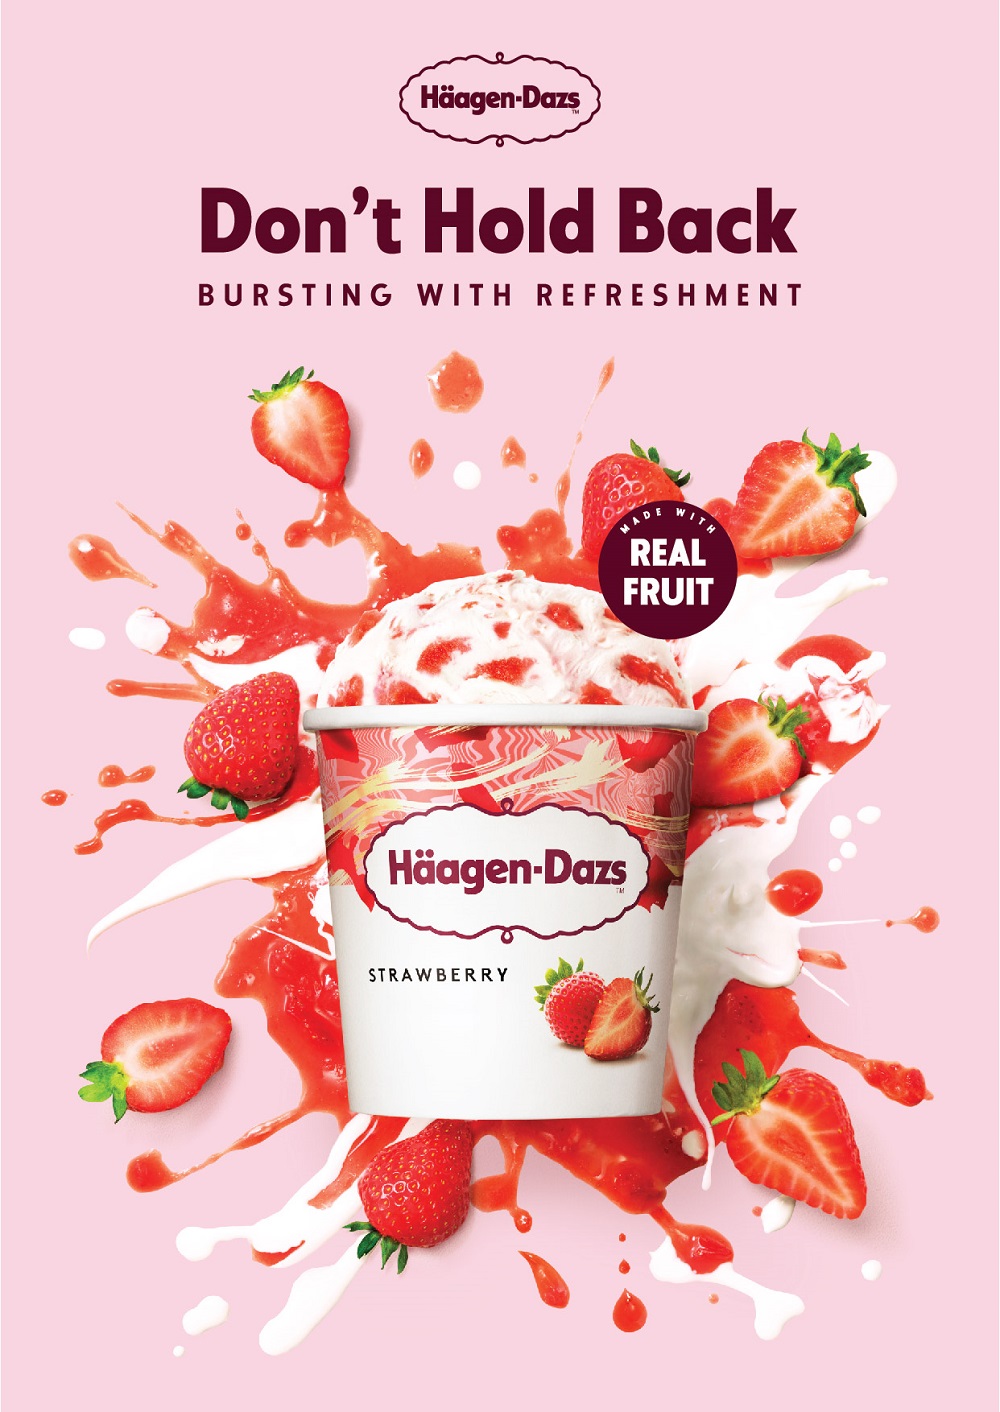 Häagen-Dazs - Over 50 Years of Passion in Every Creamy Bite